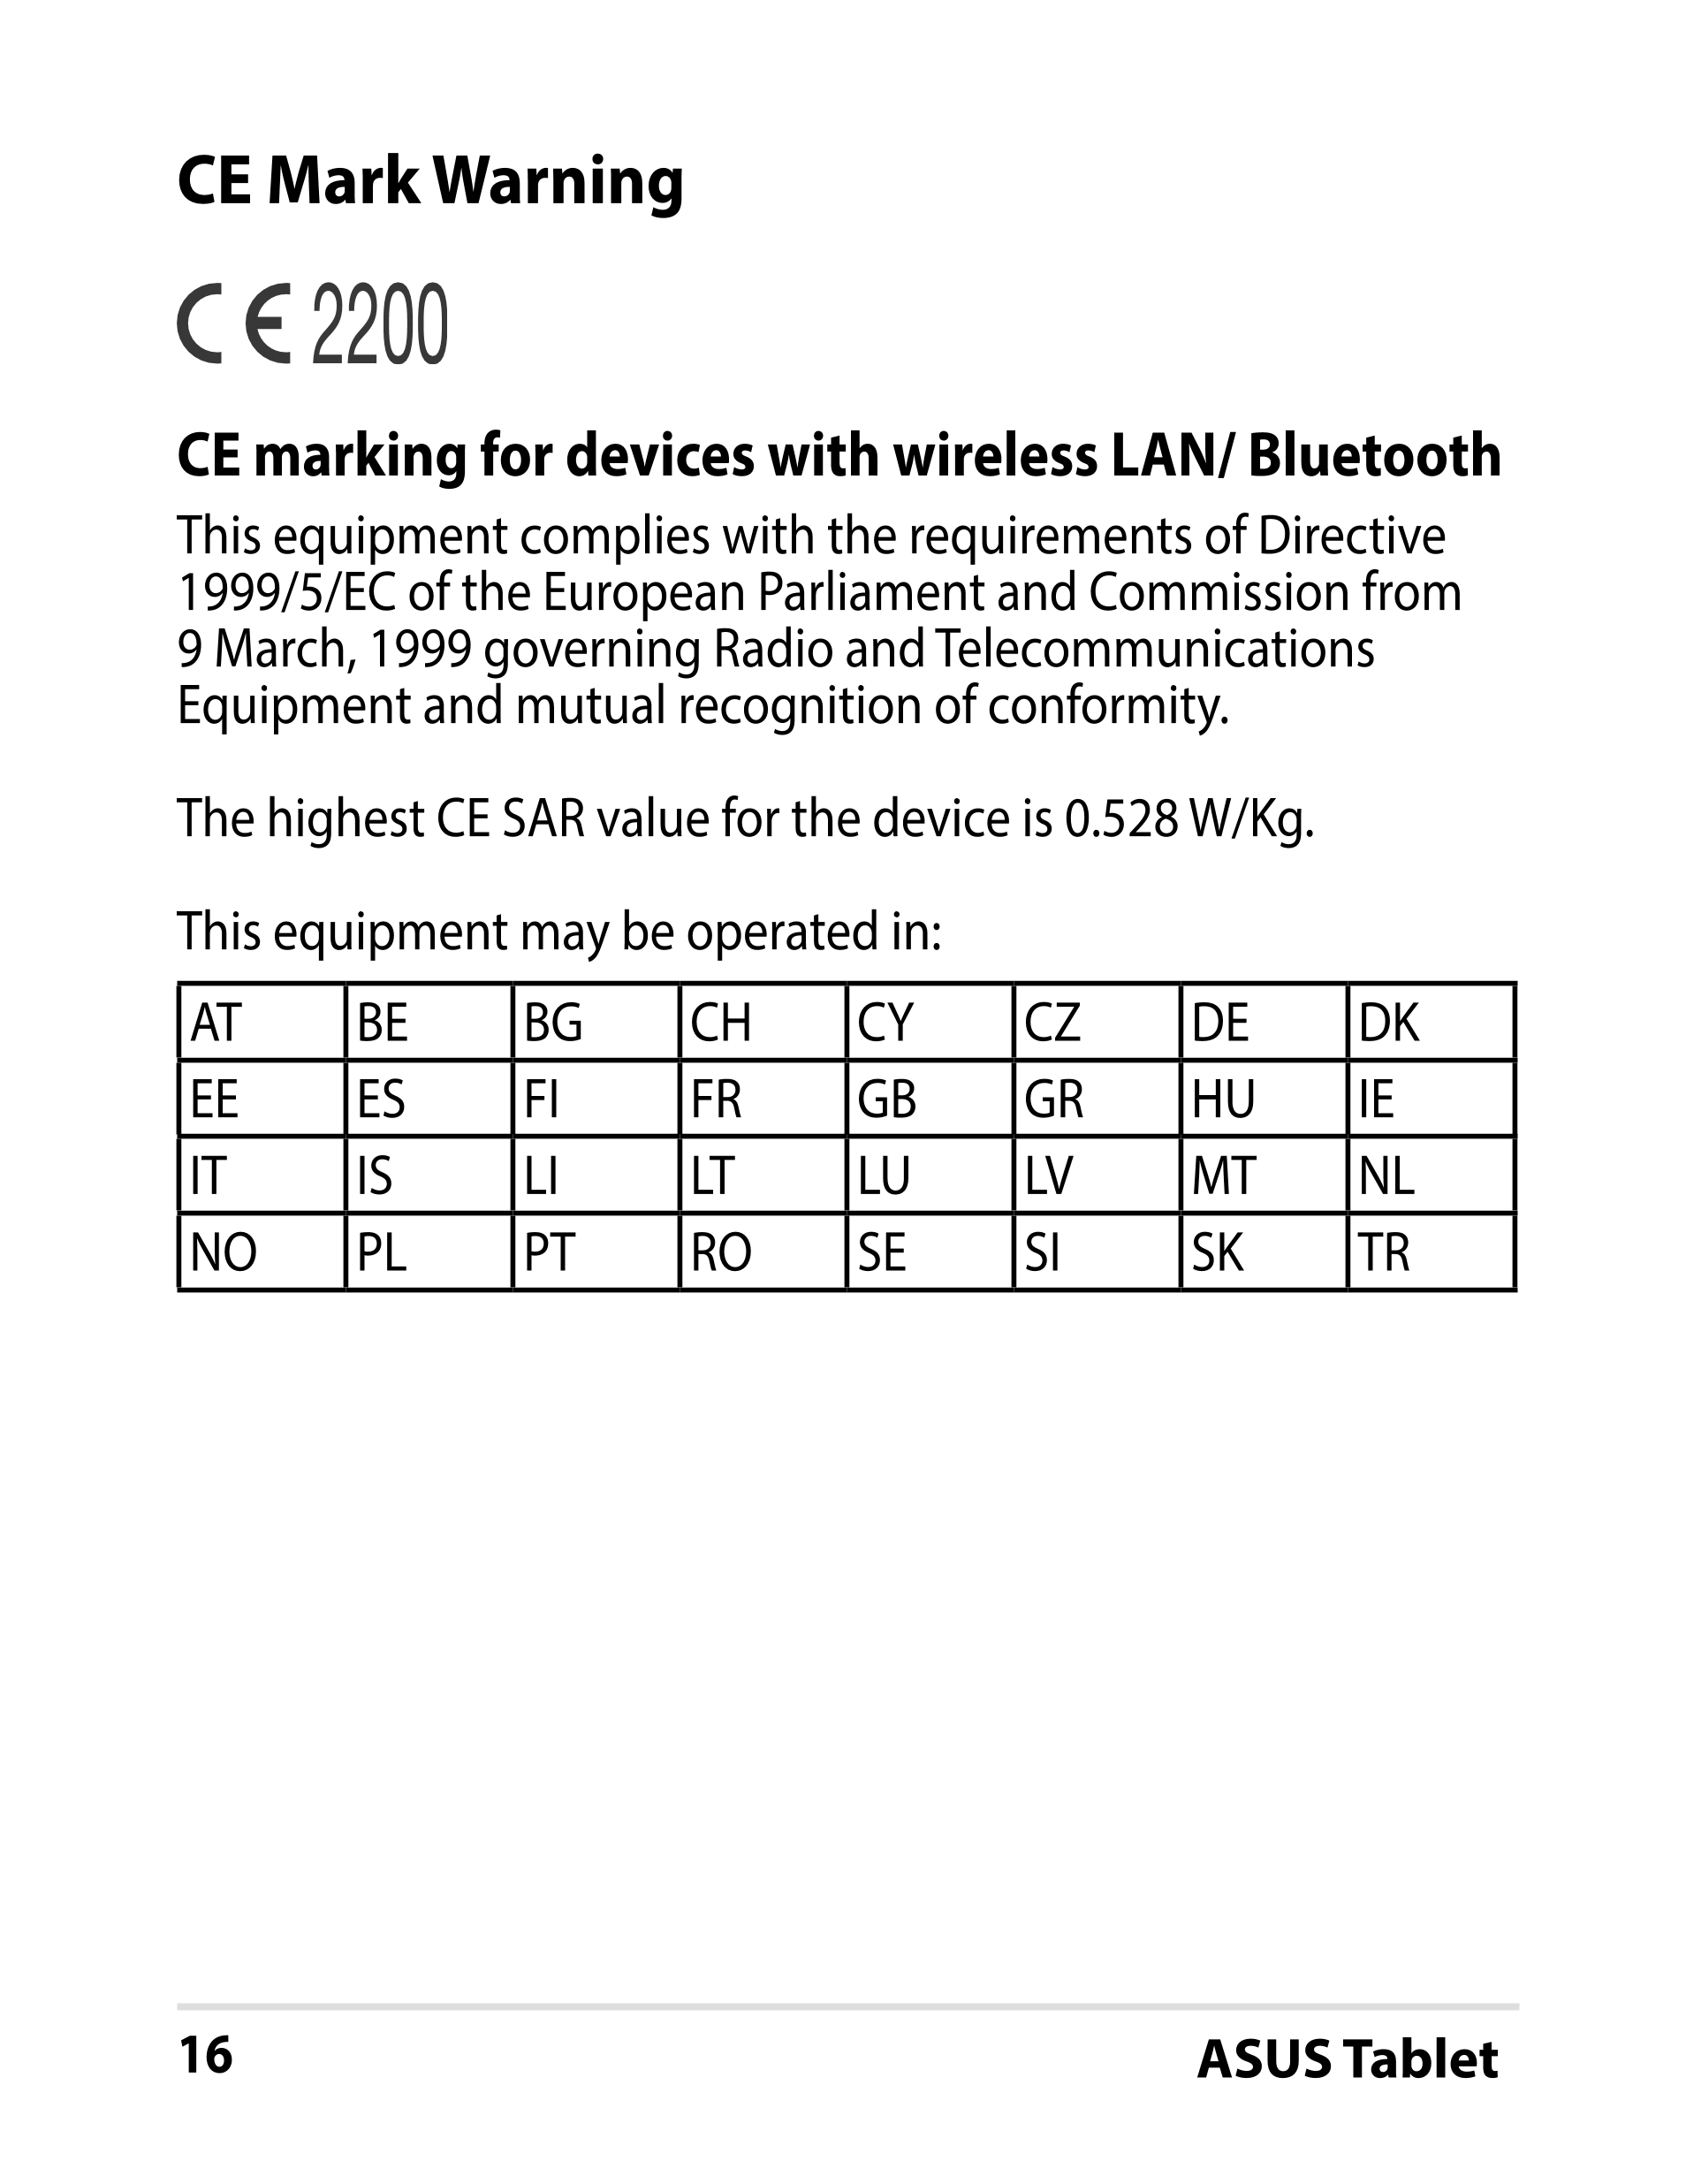 CE Mark Warning
CE marking for devices with wireless LAN/ Bluetooth
This equipment complies with the requirements of Directive 
